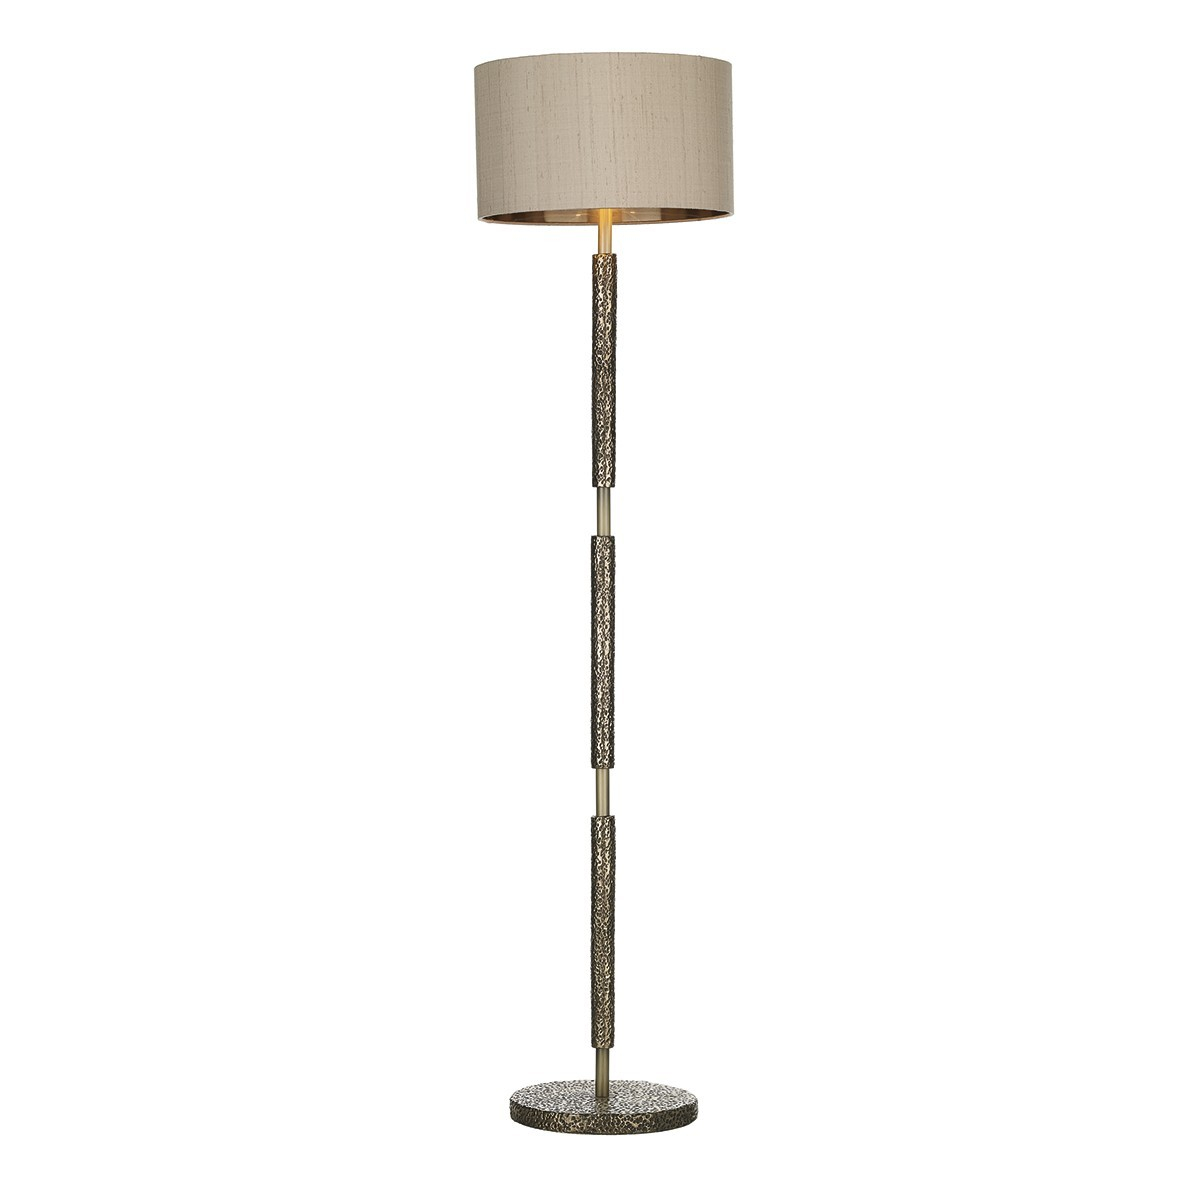 David Hunt Slo4963cai1601gd Sloane Floor Lamp In Bronze Complete With Shade for size 1200 X 1200